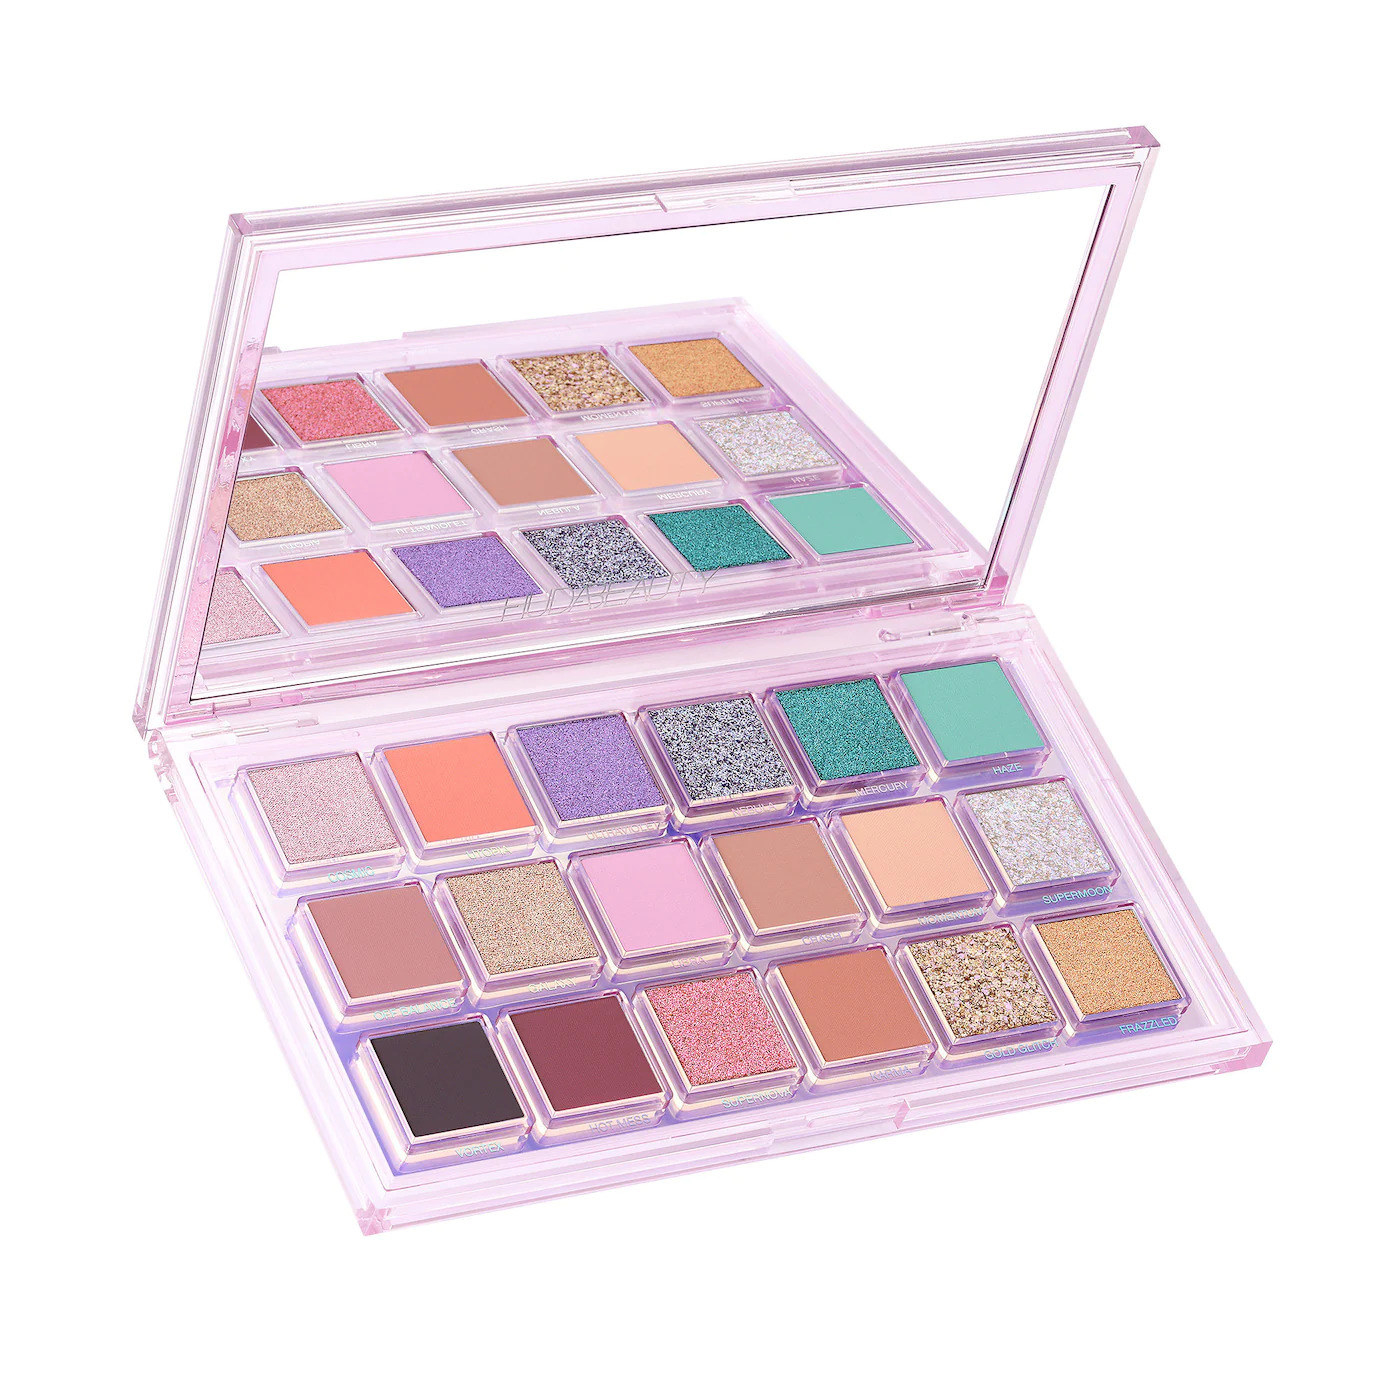 the eyeshadow palette with purples, greens, and taupes